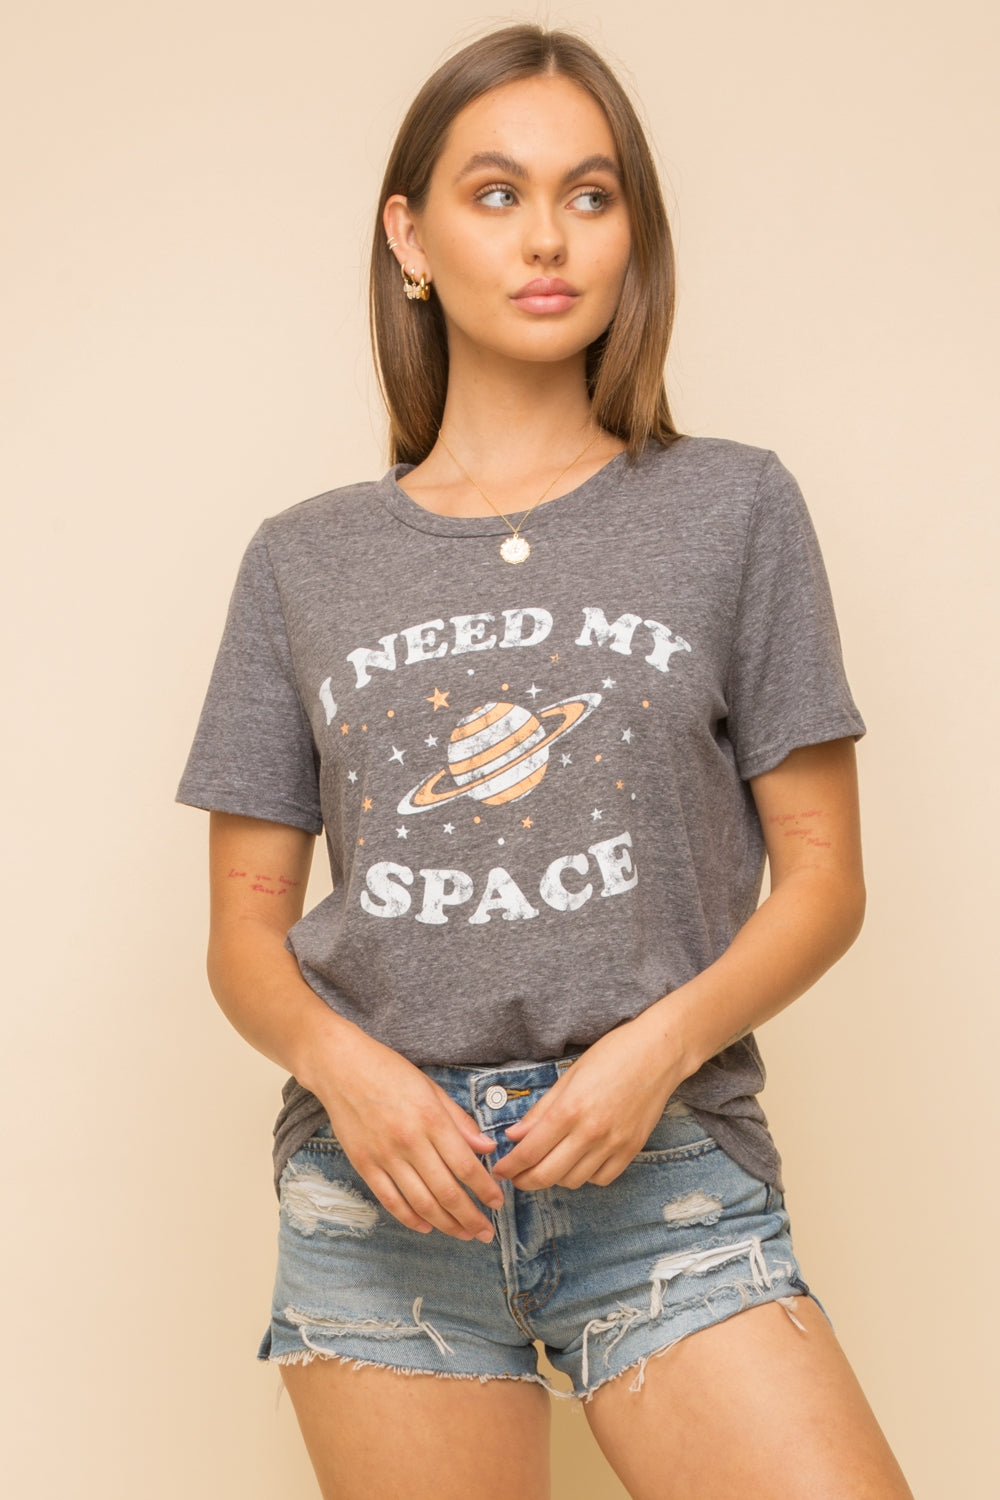 Need Space Top